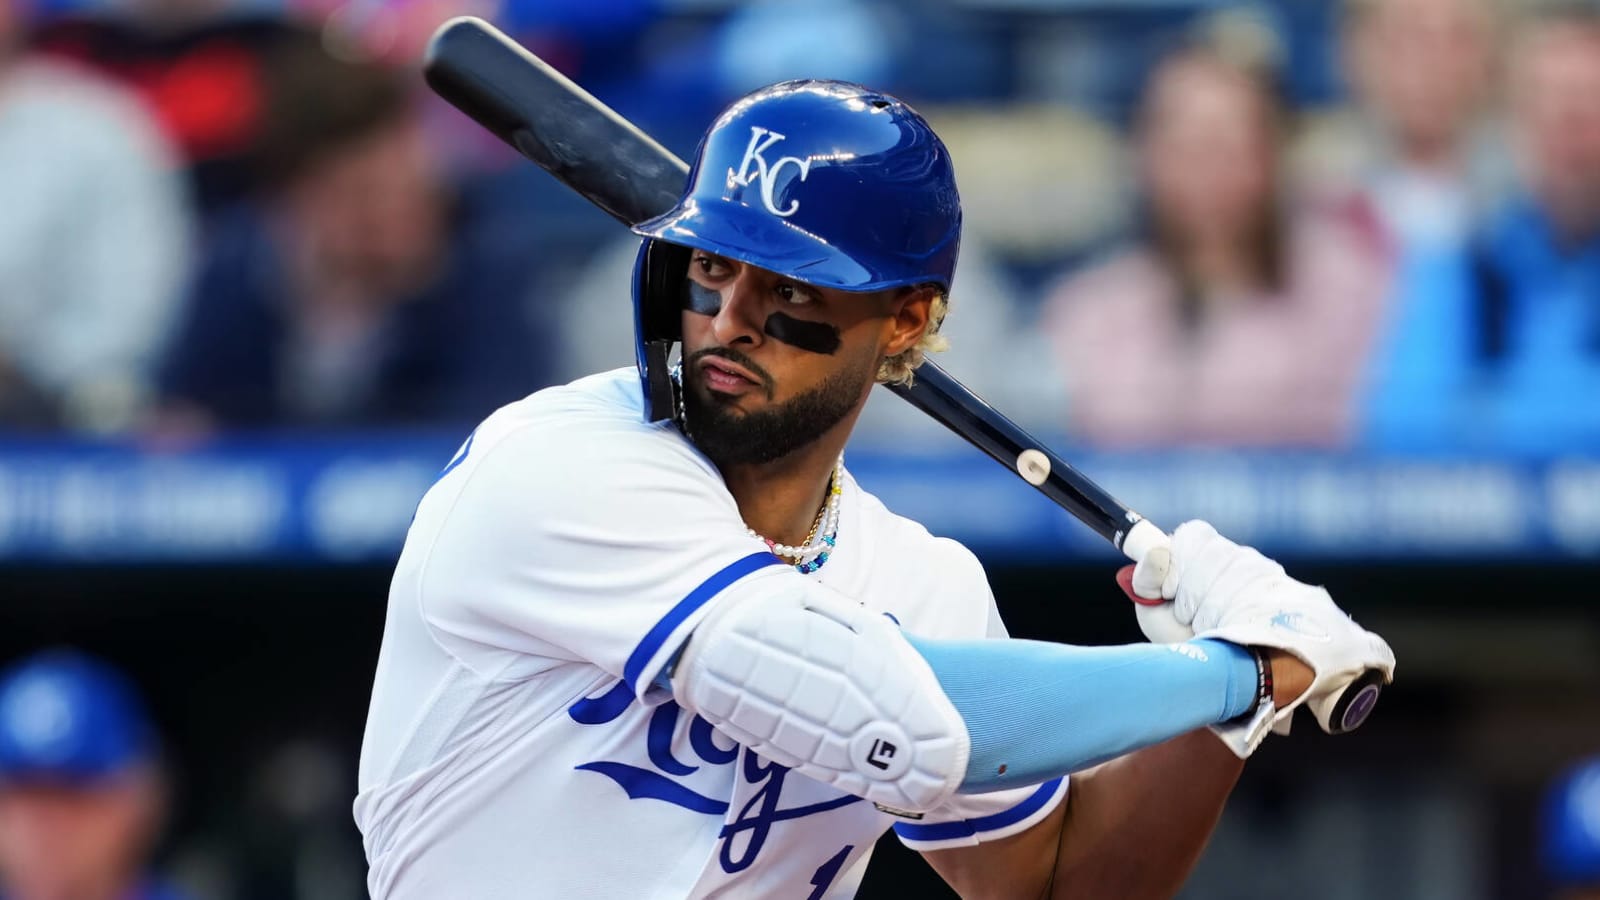 The most alarming aspect of Royals' disappointing season